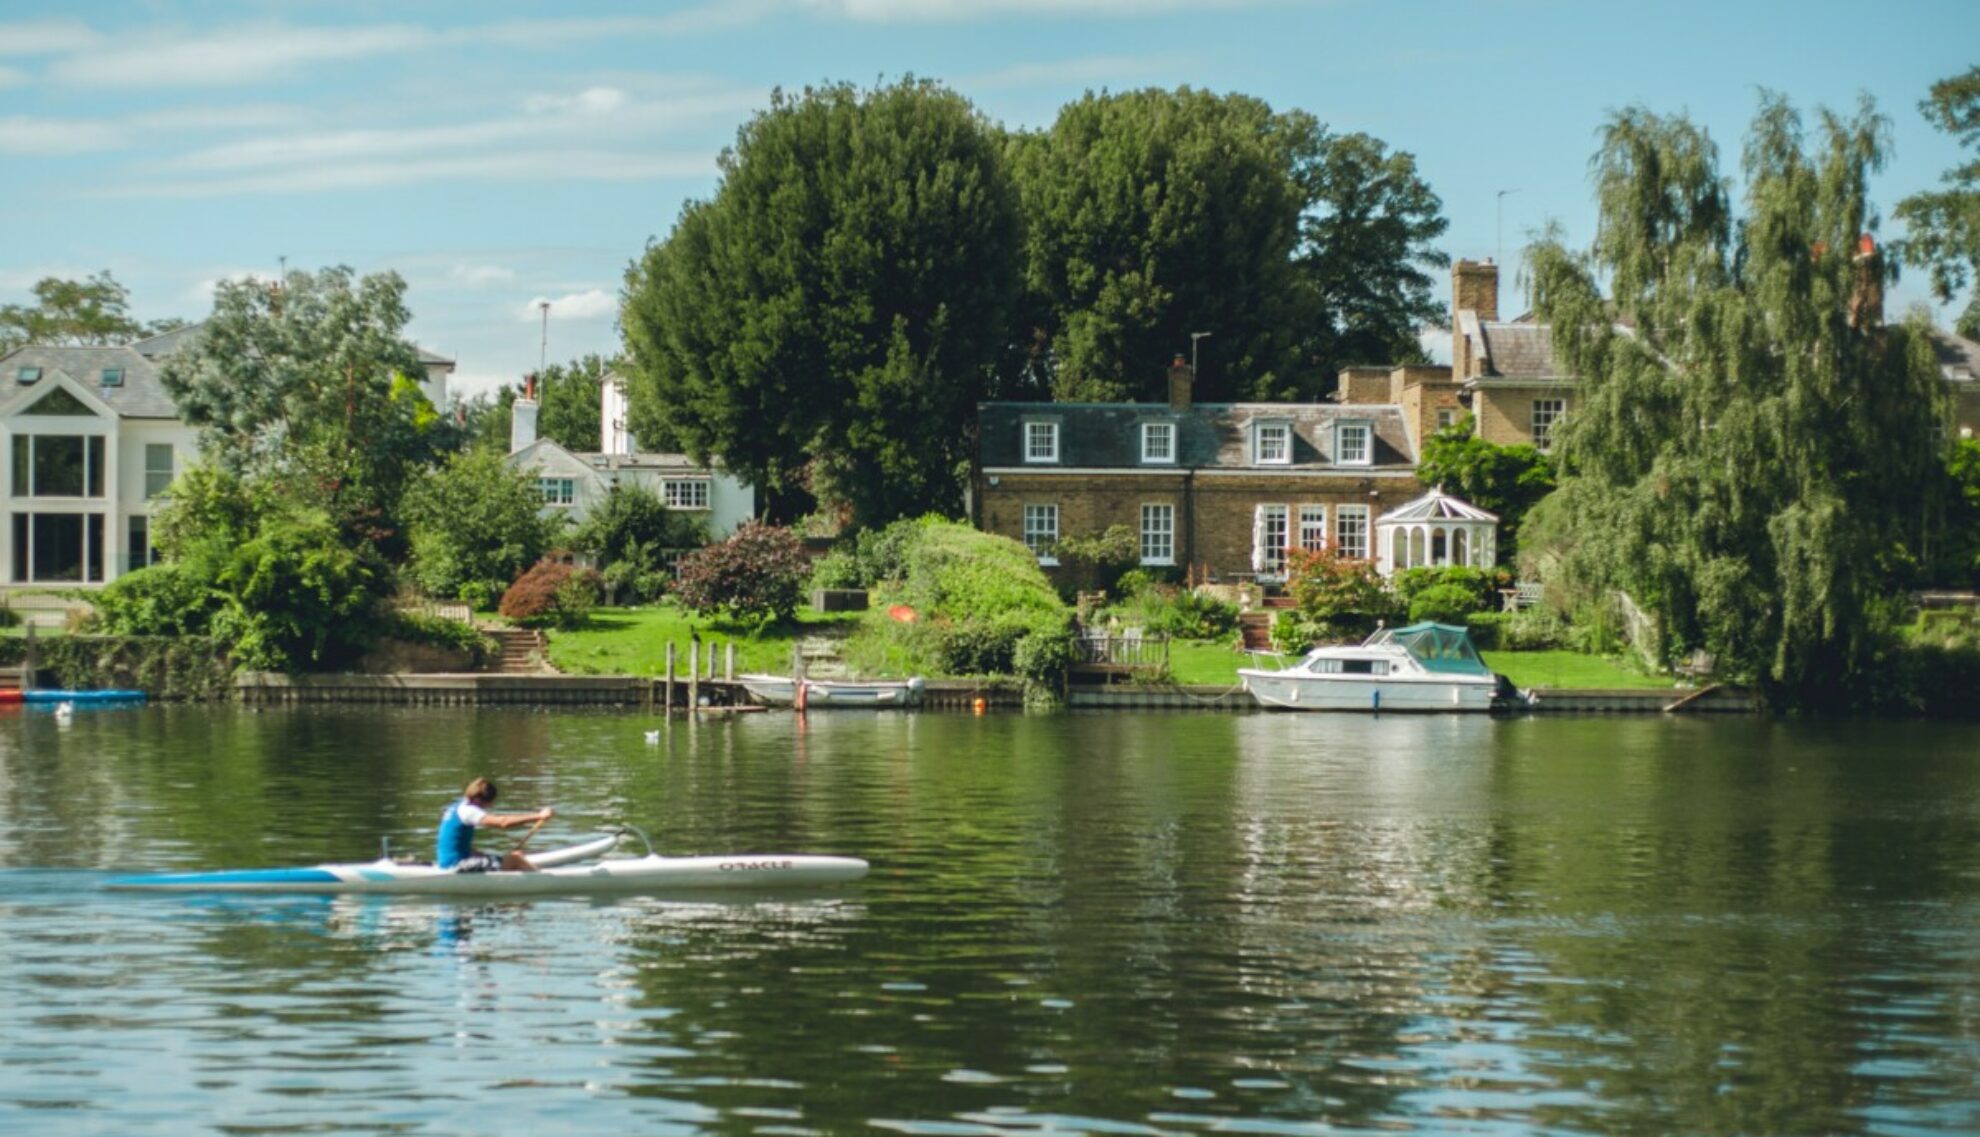 A rower on the River Thames near Kingston